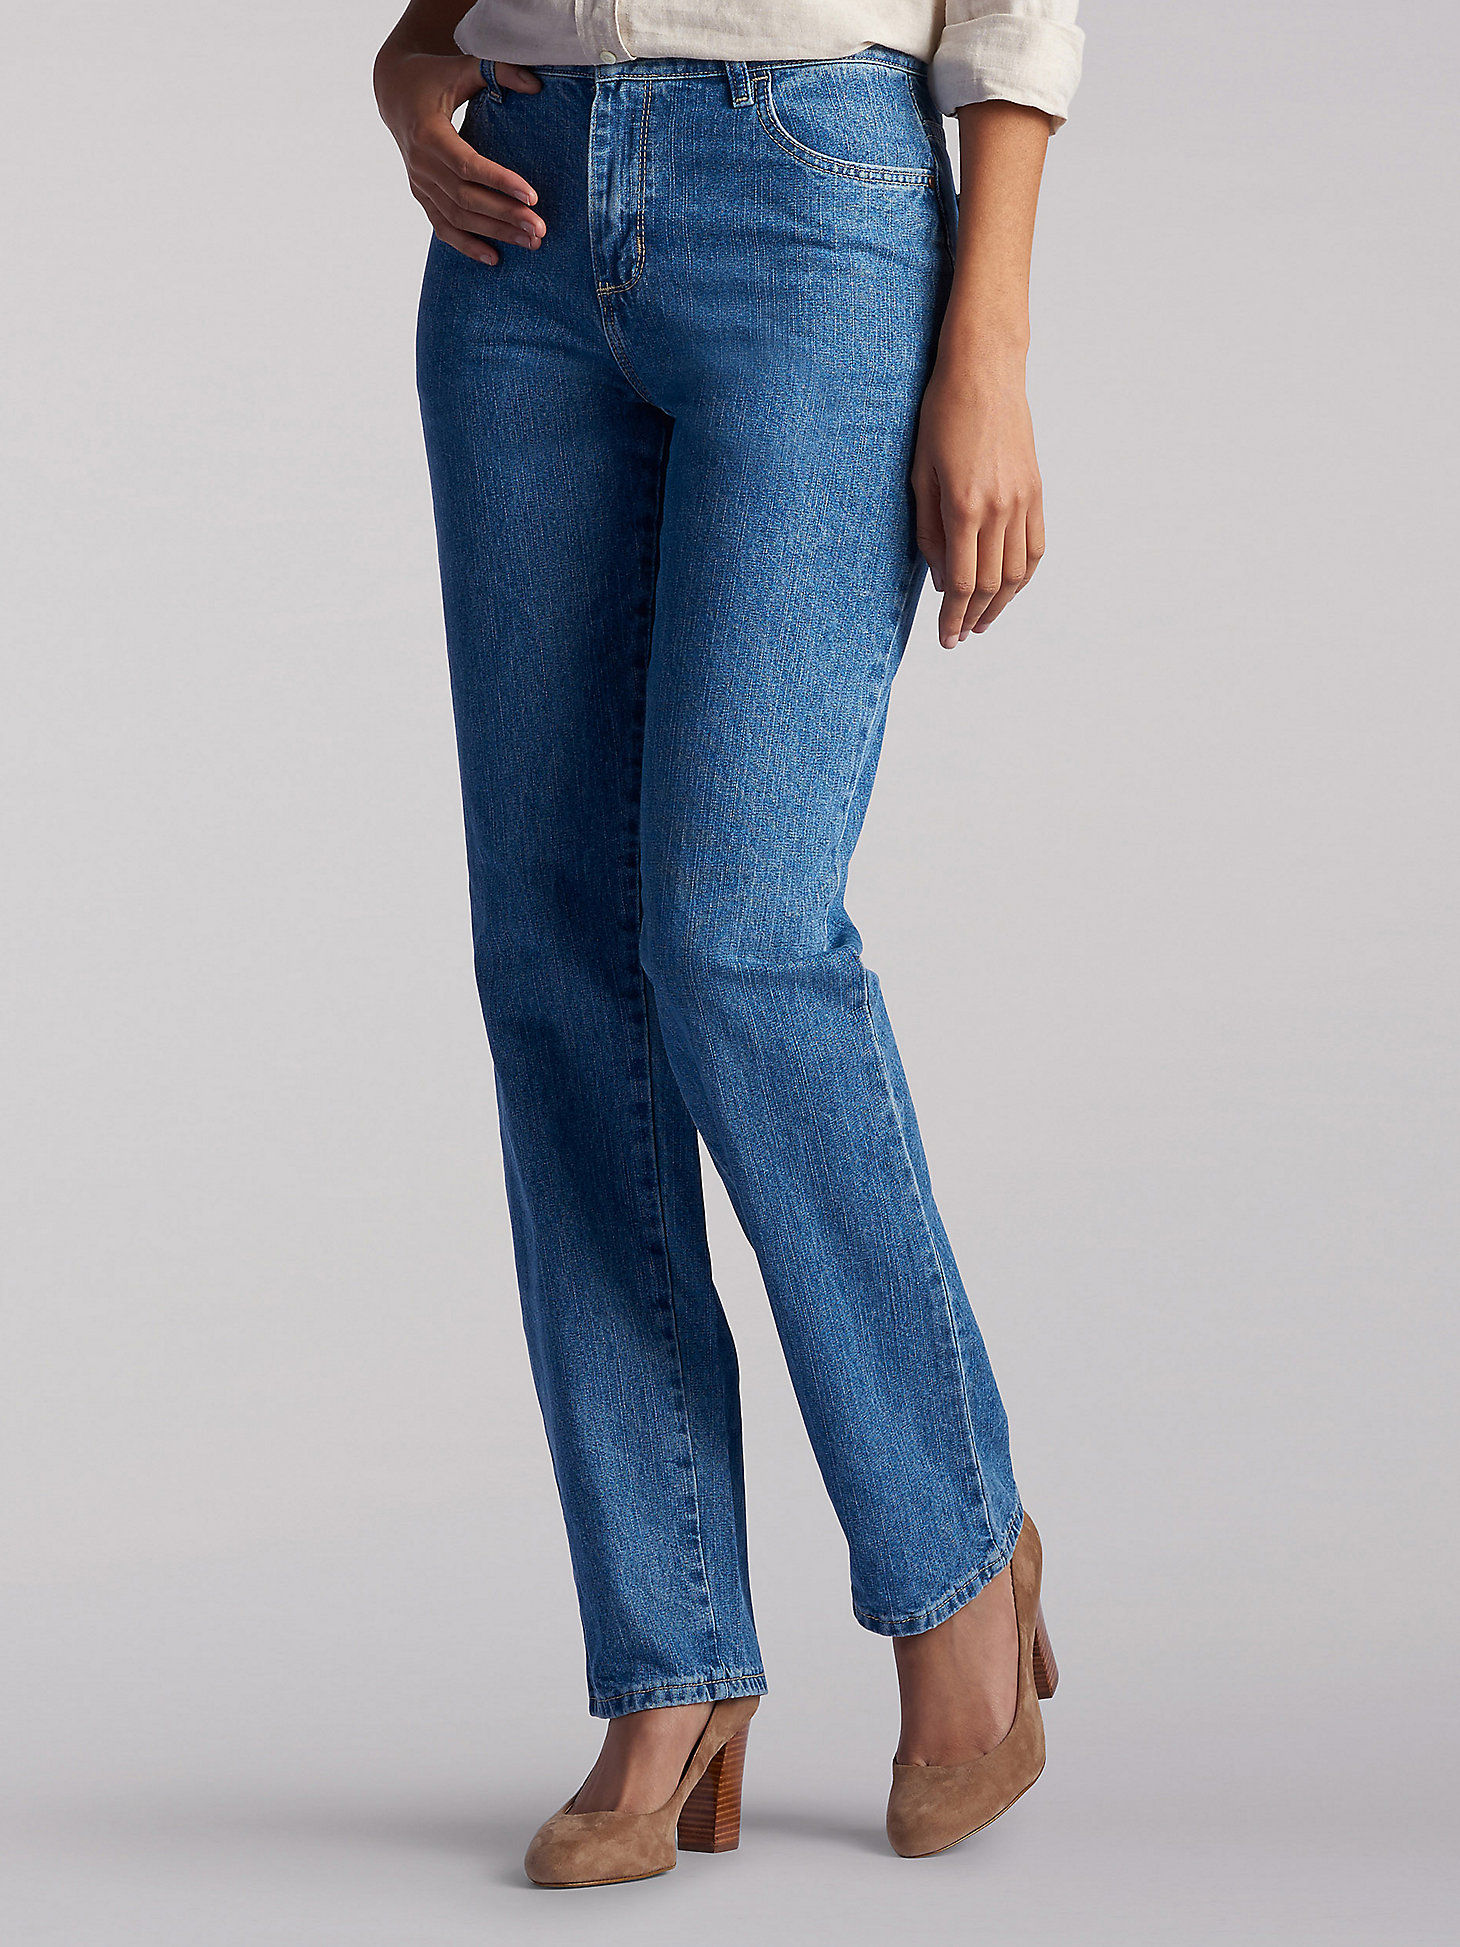 Women’s 100% Cotton Relaxed Fit Straight Leg Jean in Aero main view